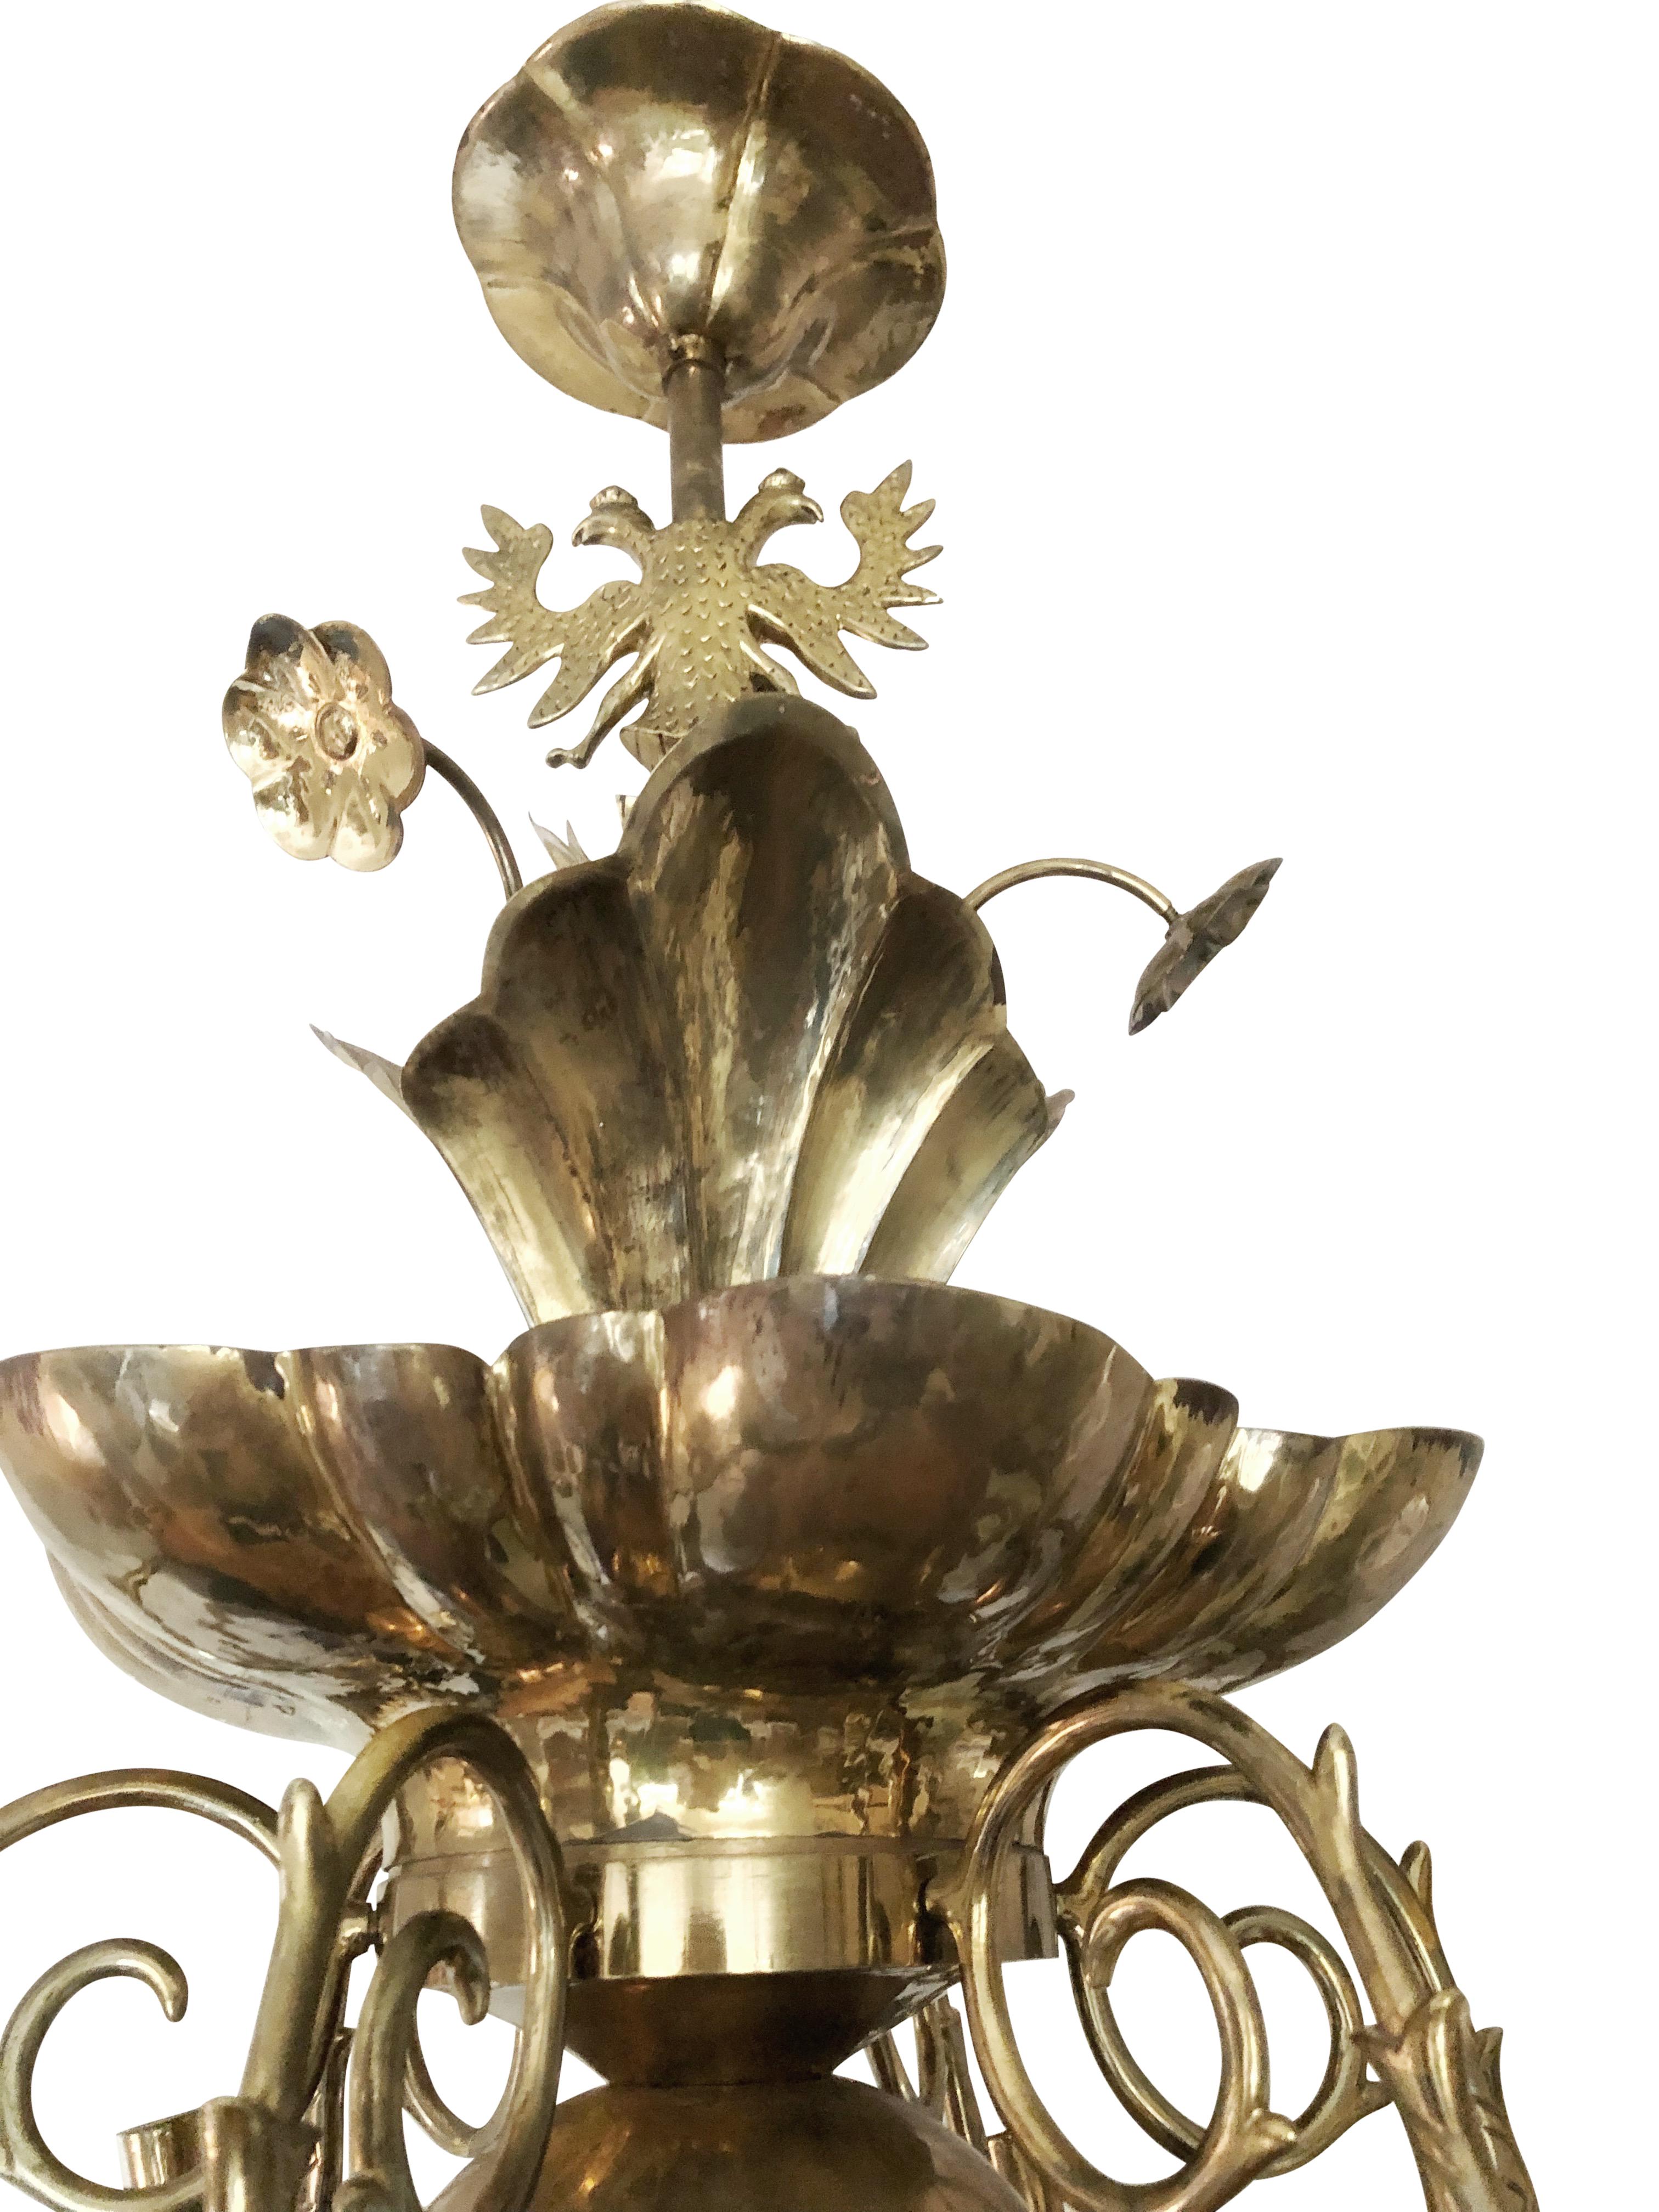 Rare Arvika hand-hammered six-armed brass chandelier made by Sten Johansson for Firma Lars Holmström, Arvika, Sweden.
Six candelabra sockets and six candle light holders.
Arvika stamp.
The chandelier needs new electricity. One lamp holder is